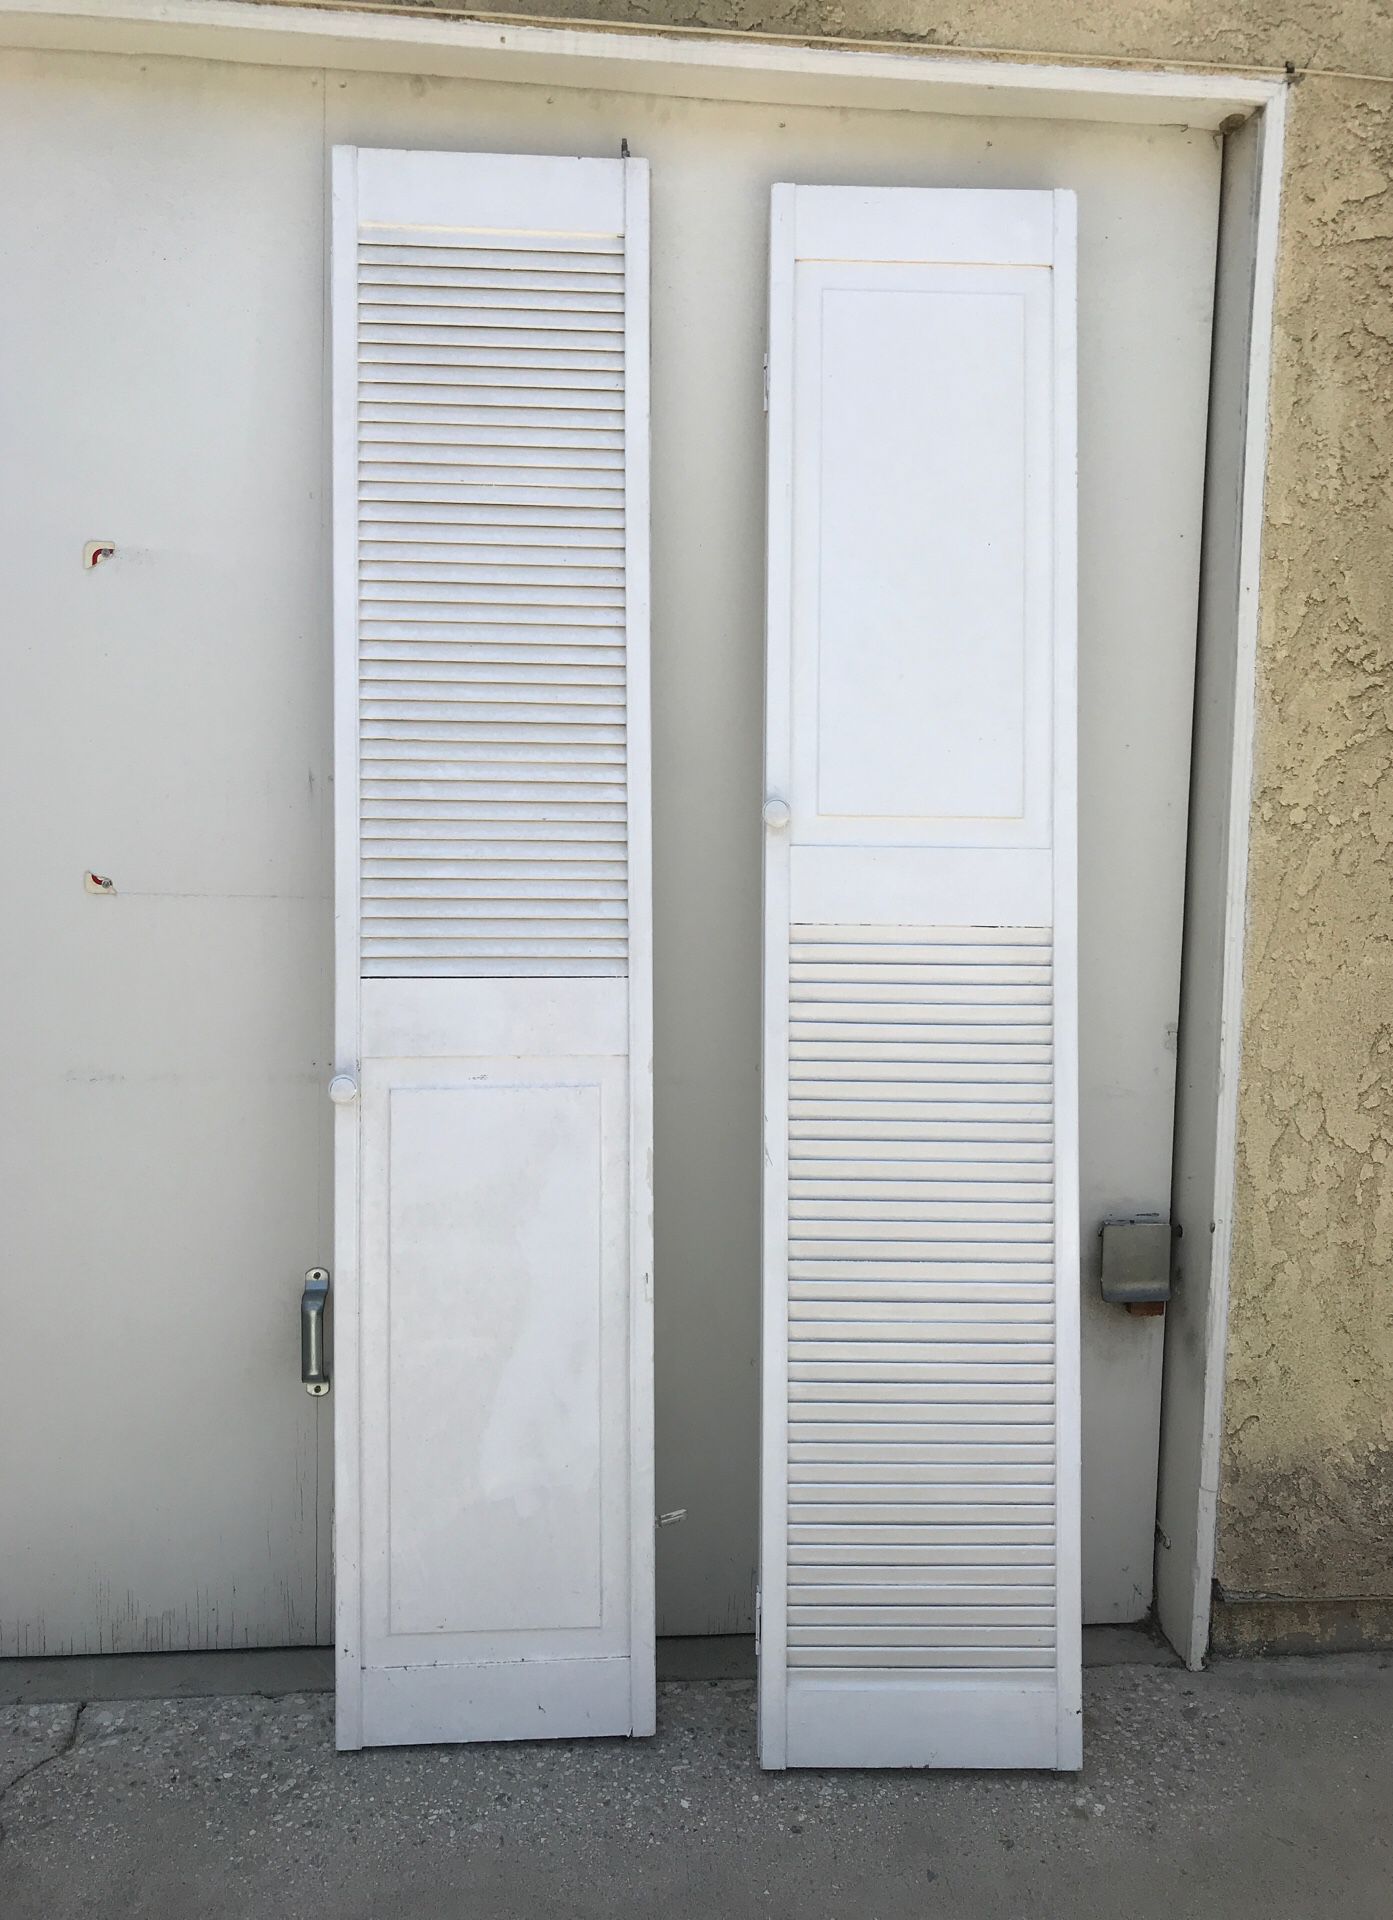 Laundry room doors two 80” high and 32 wide but when folded they are 16” each. $15 each OBO!